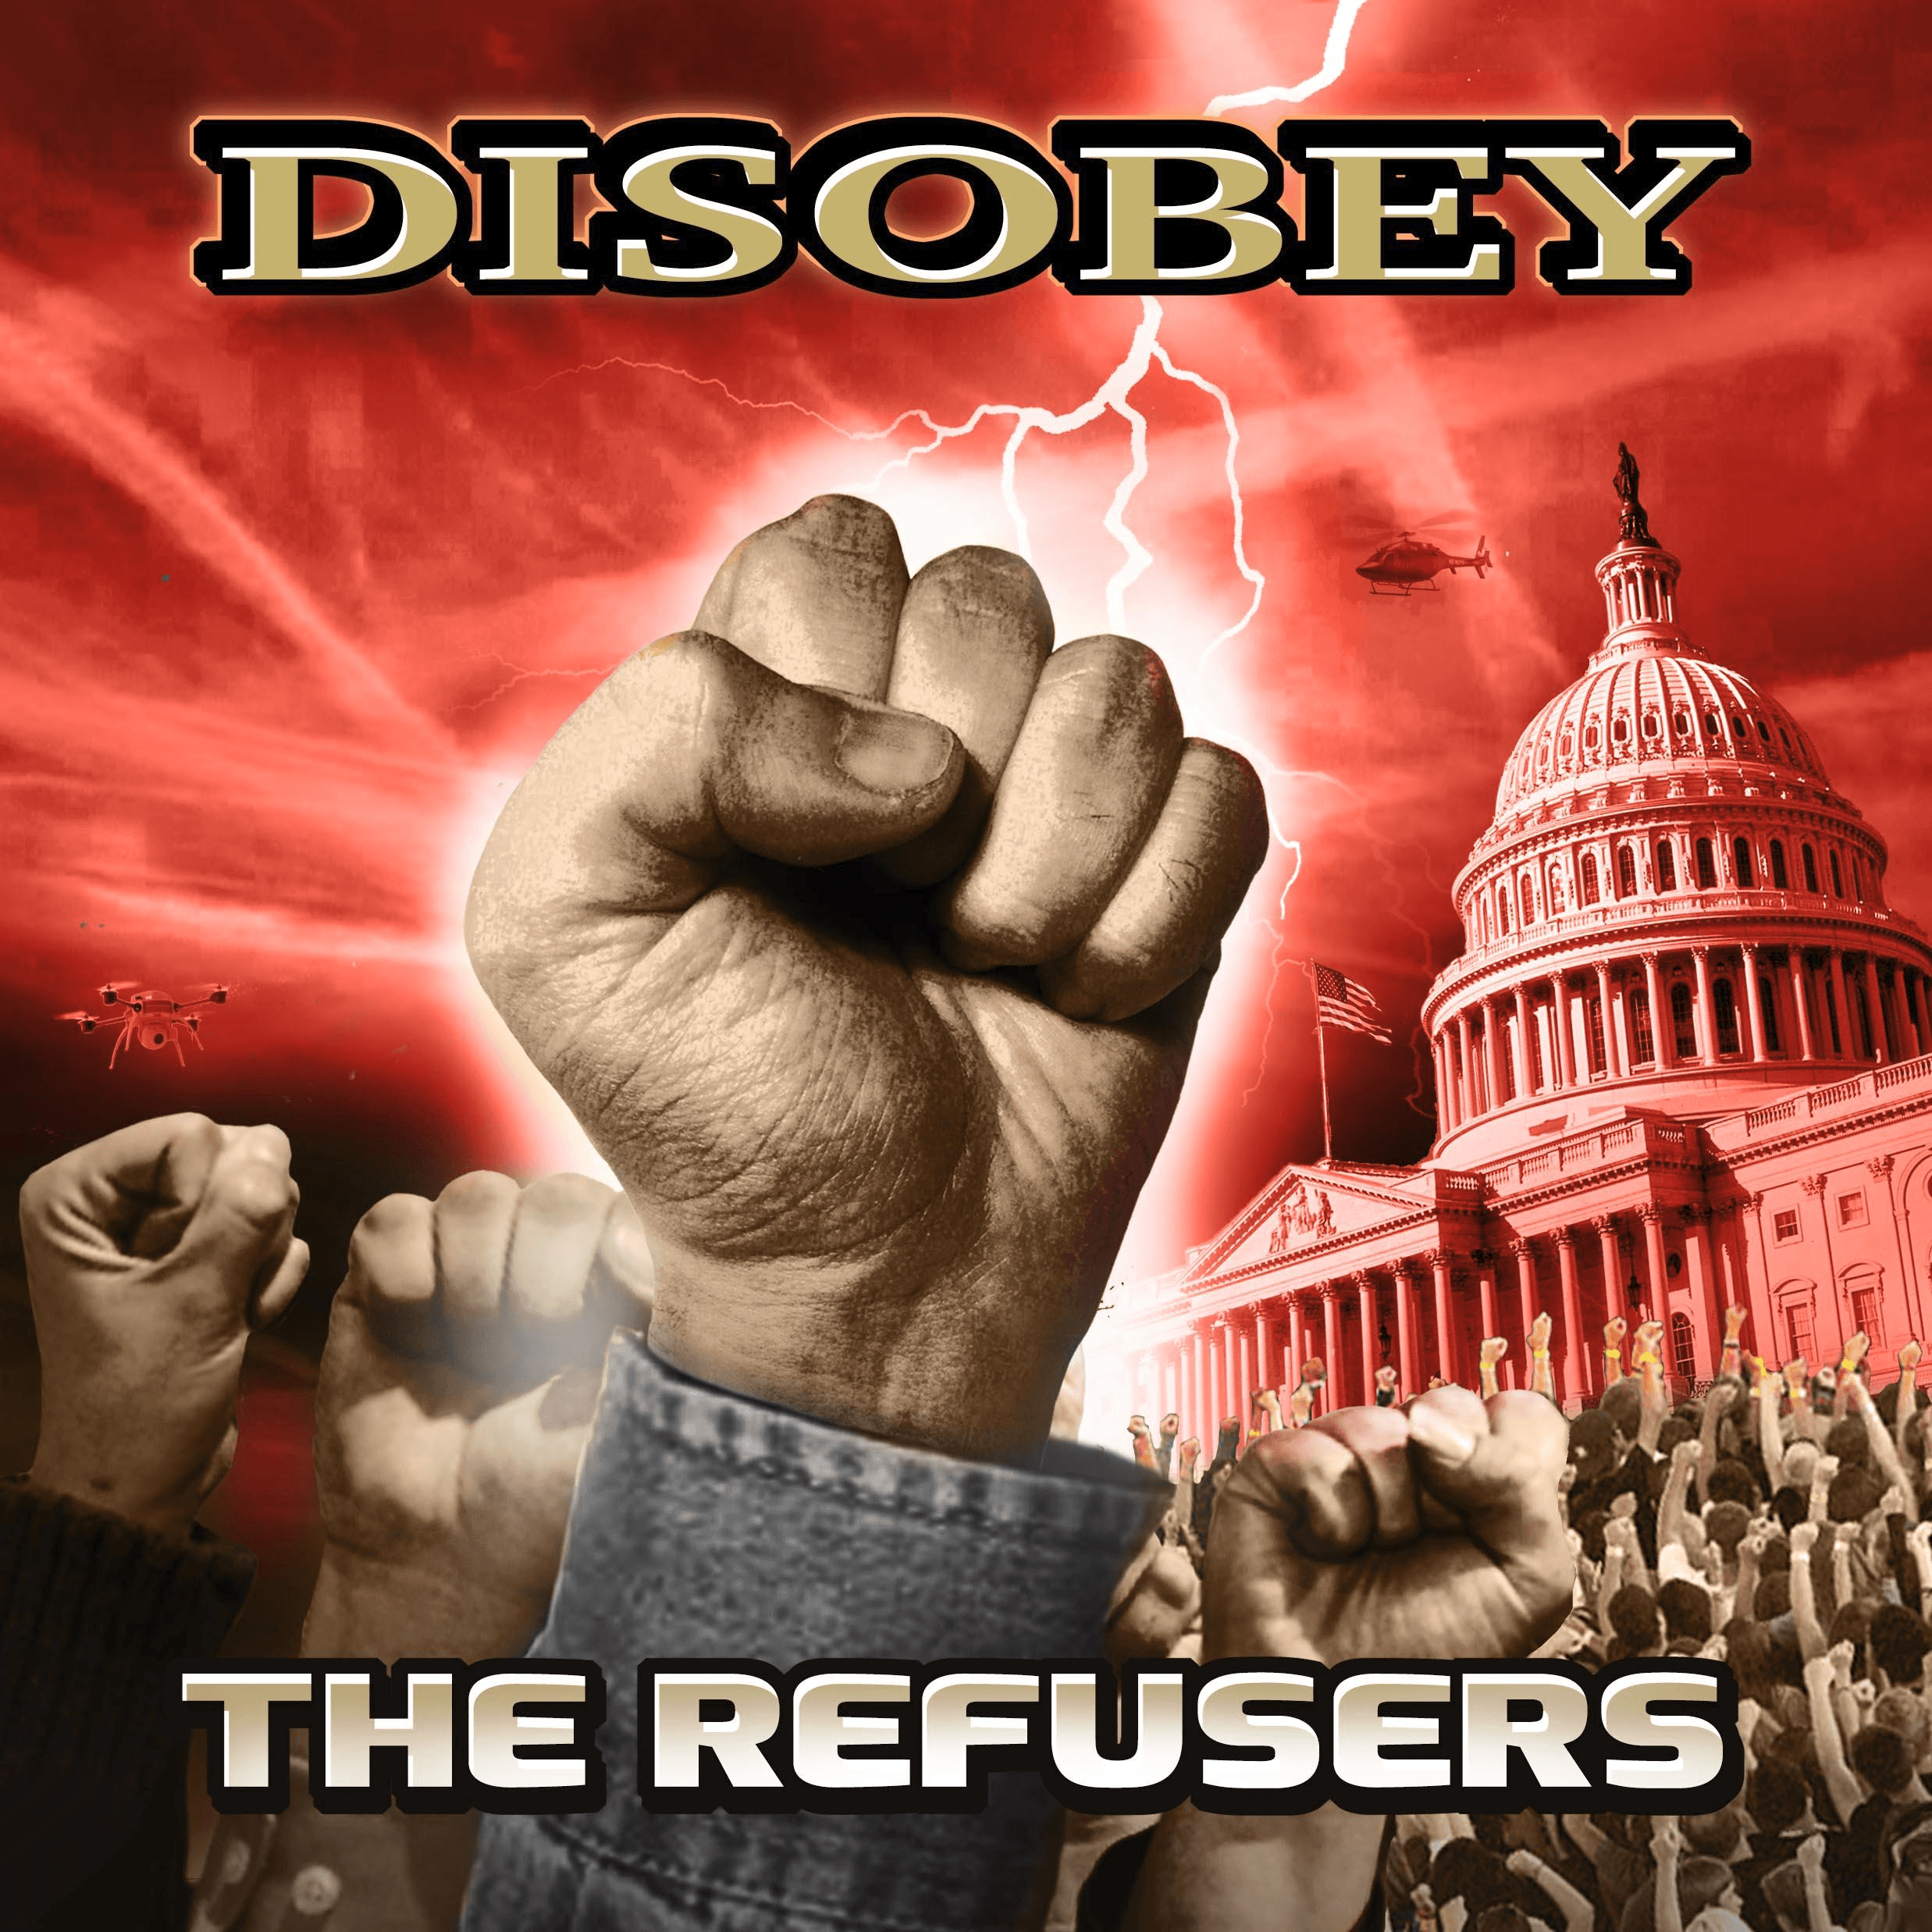 The Refusers' Disobey